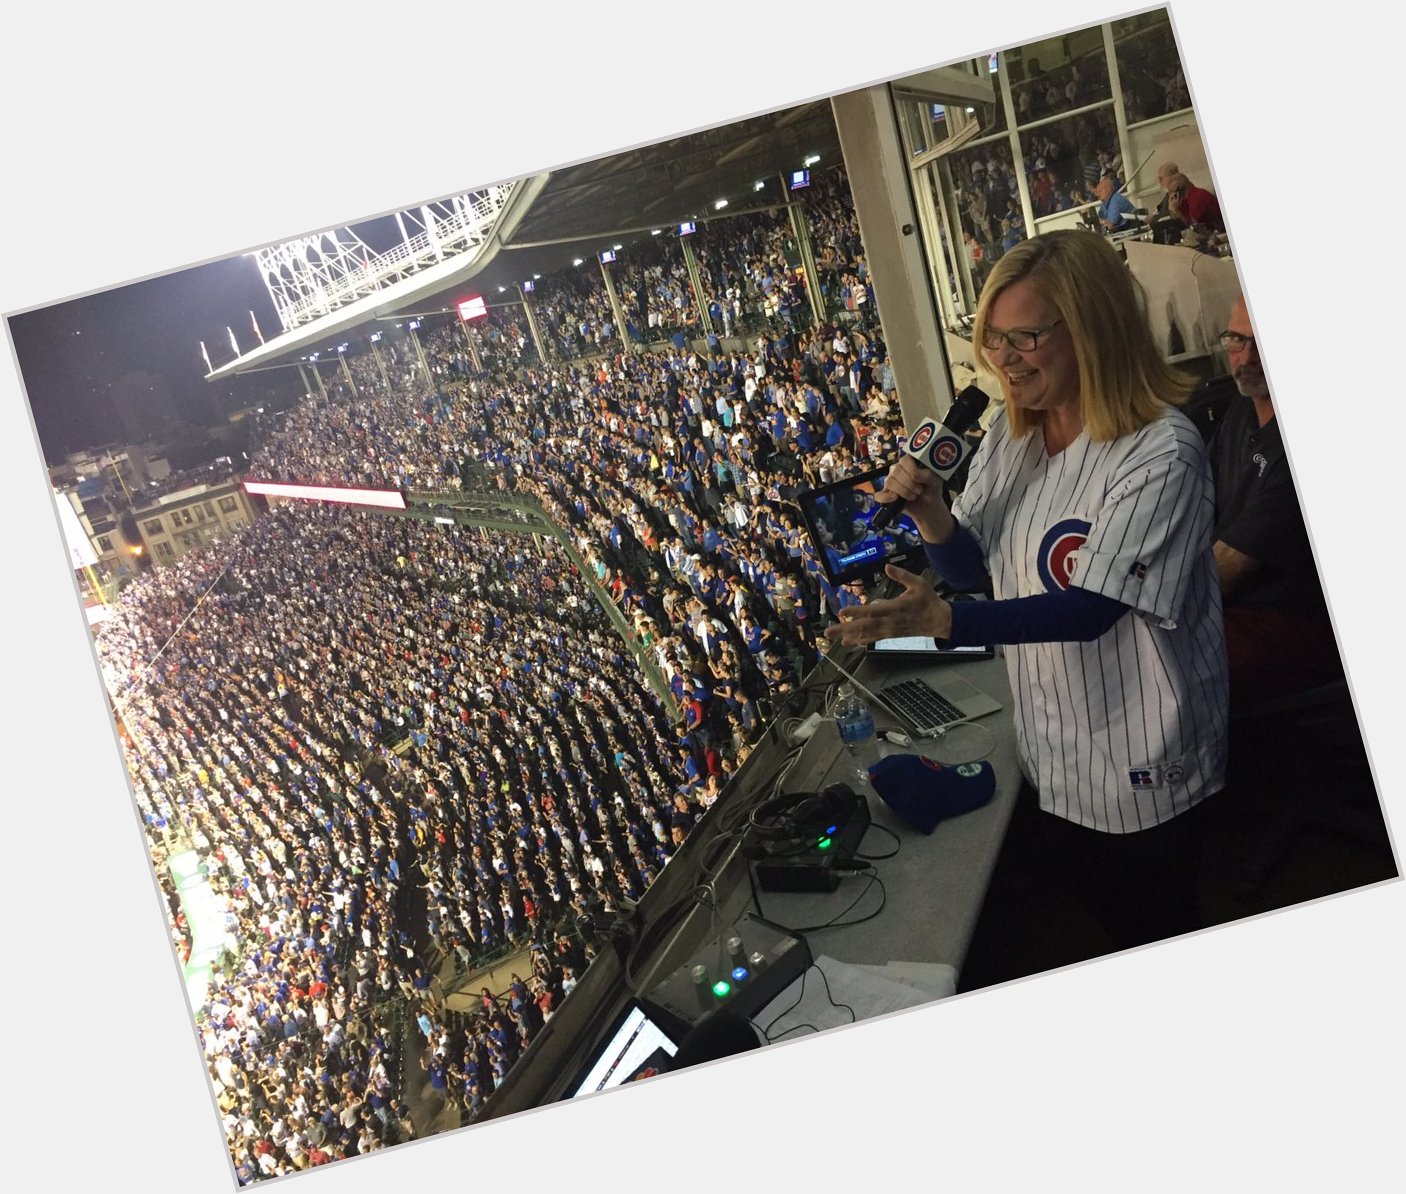 Today we wish a very happy birthday to one of the biggest Cubs fans around, our great friend Bonnie Hunt! 